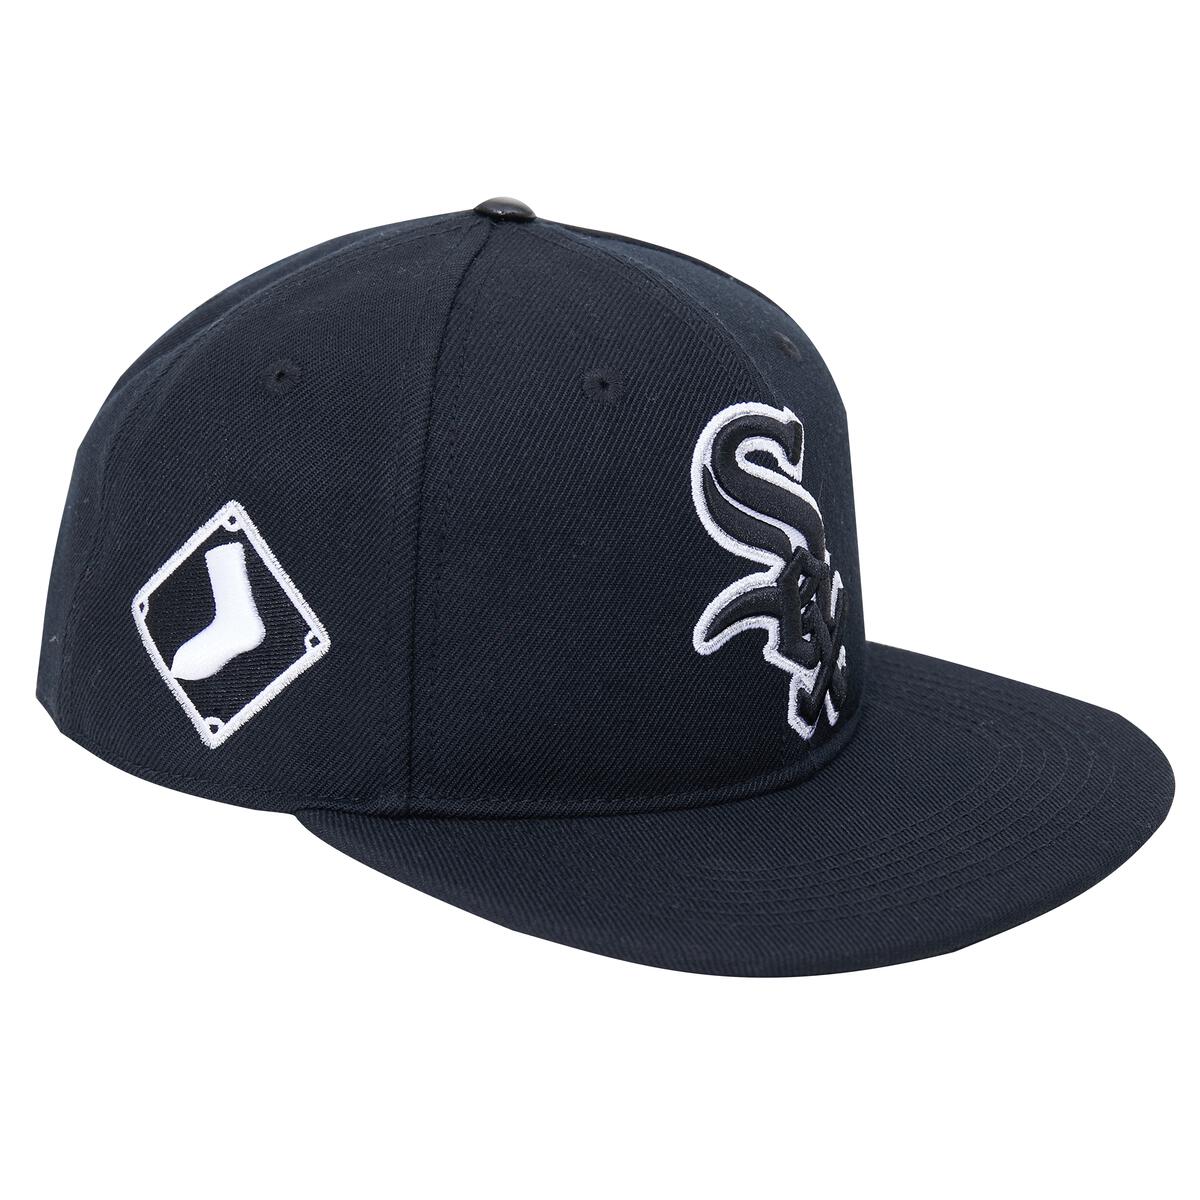 Pro Standard - Chicago White Sox Classic Chenille Wool Snapback Hat